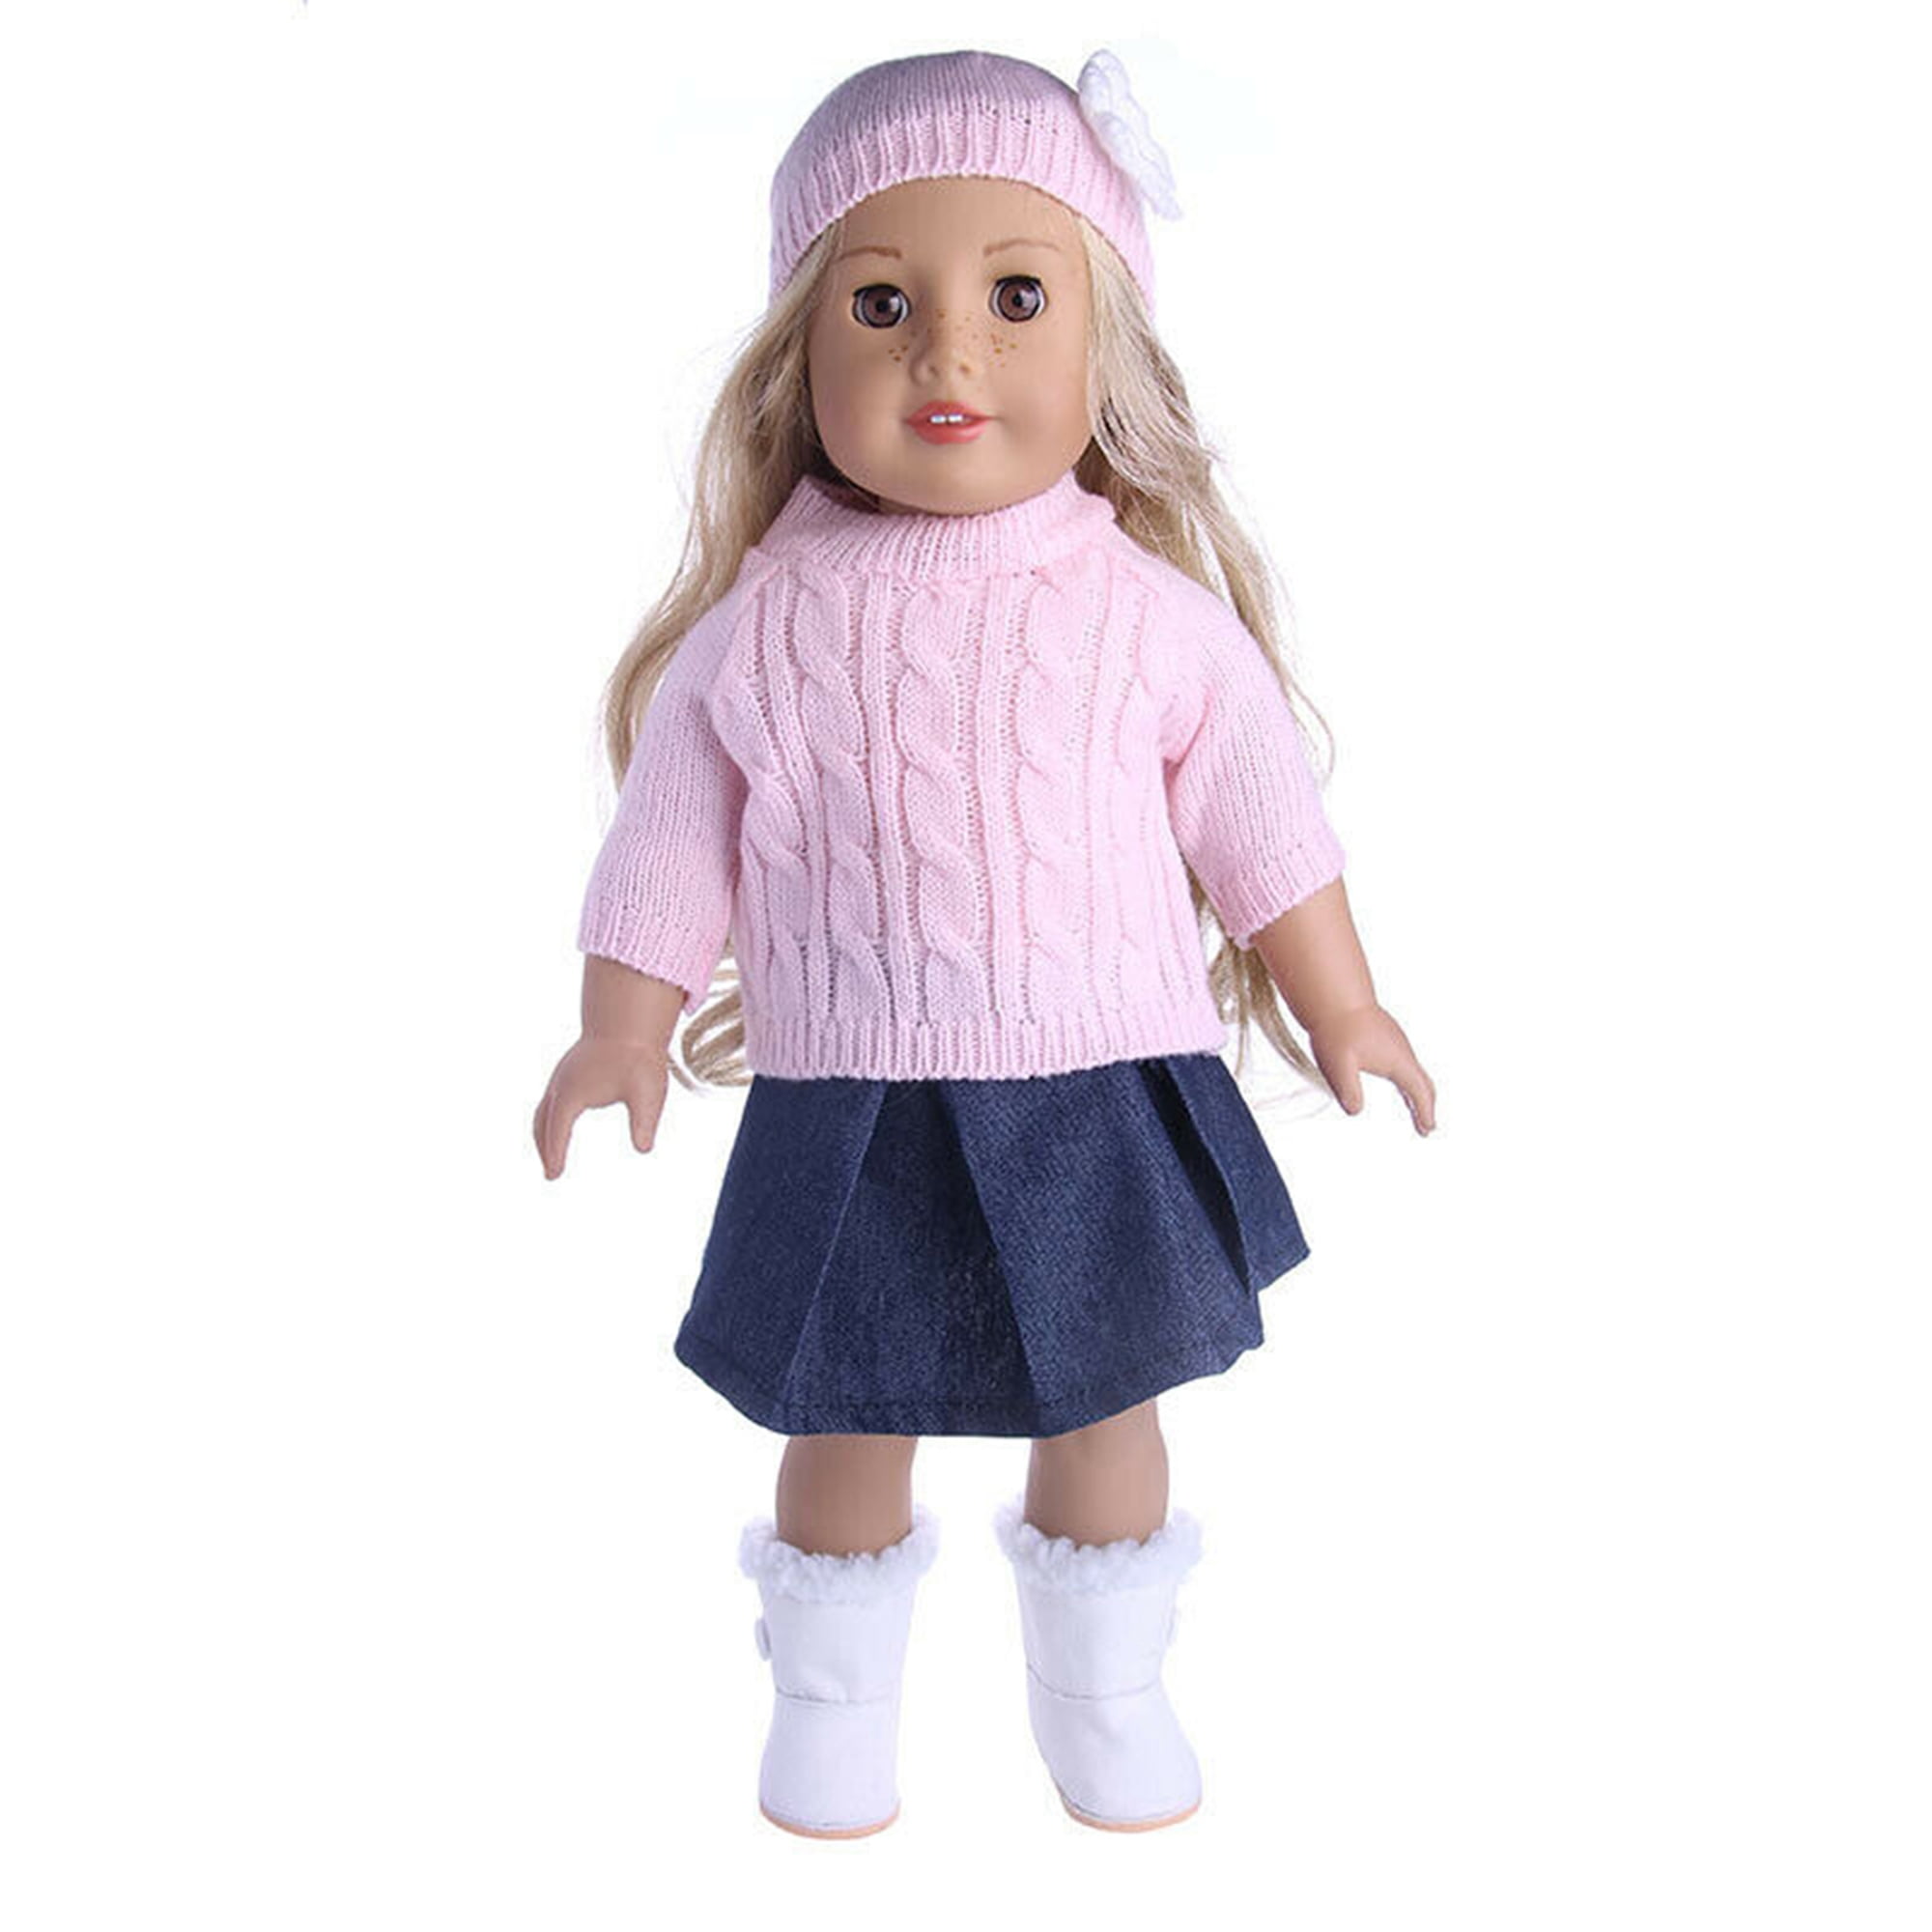 GuliriFei 18'' American Girl Outfit Dress Clothes Our Generation My Life  Doll Christmas Gift 